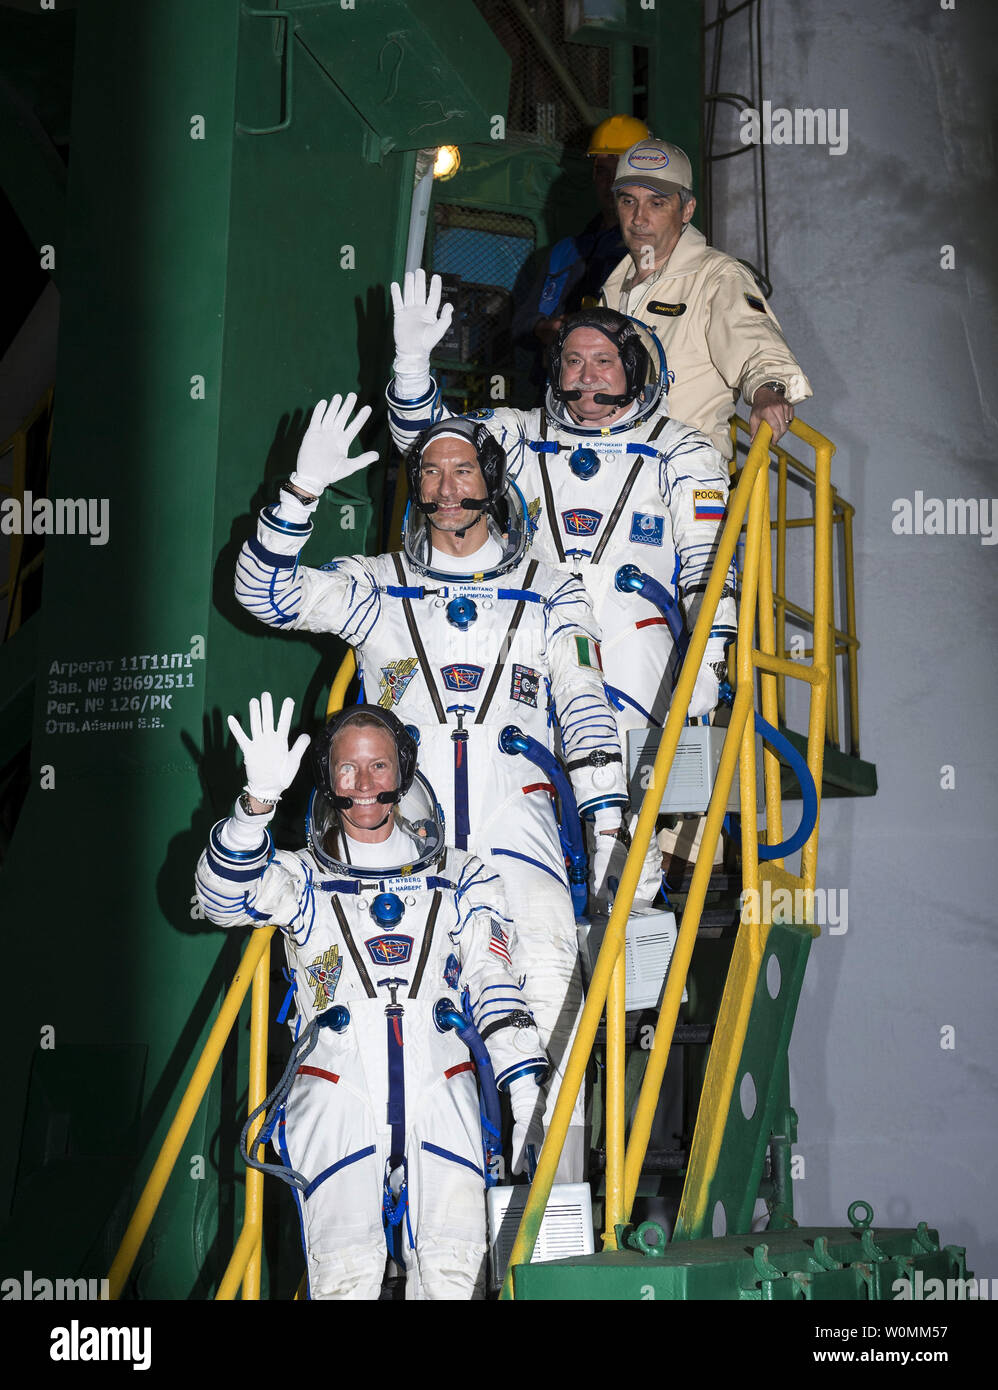 Expedition 36/37 Soyuz Commander Fyodor Yurchikhin of the Russian Federal Space Agency (Roscosmos), top, Flight Engineers: Luca Parmitano of the European Space Agency, center, and Karen Nyberg of NASA, bottom, wave farewell as they board the Soyuz rocket ahead of their launch to the International Space Station in Baikonur, Kazakhstan on Wednesday, May 29, 2013. The crew's Soyuz rocket is scheduled to launch at 2:31 a.m., May 29, Kazakh time. Yurchikhin, Nyberg and Parmitano, will remain aboard the station until mid-November. UPI/Bill Ingalls/NASA Stock Photo